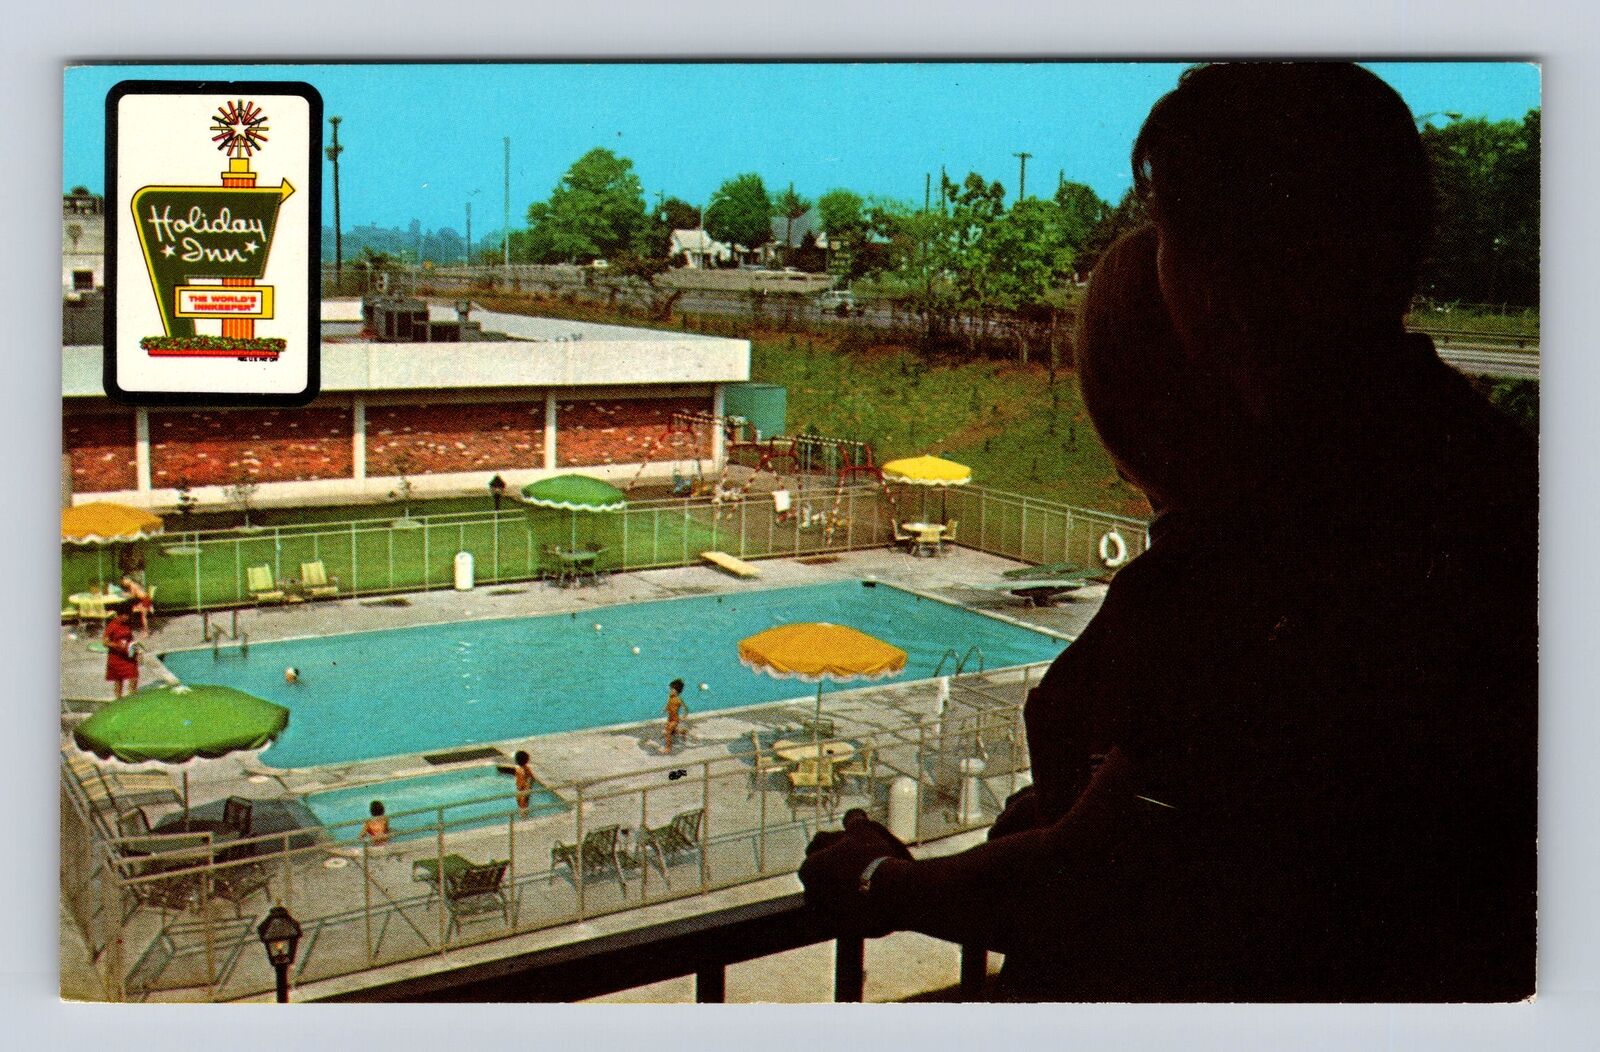 Knoxville TN-Tennessee, Holiday Inn, Marque, Pool, Advertising, Vintage Postcard